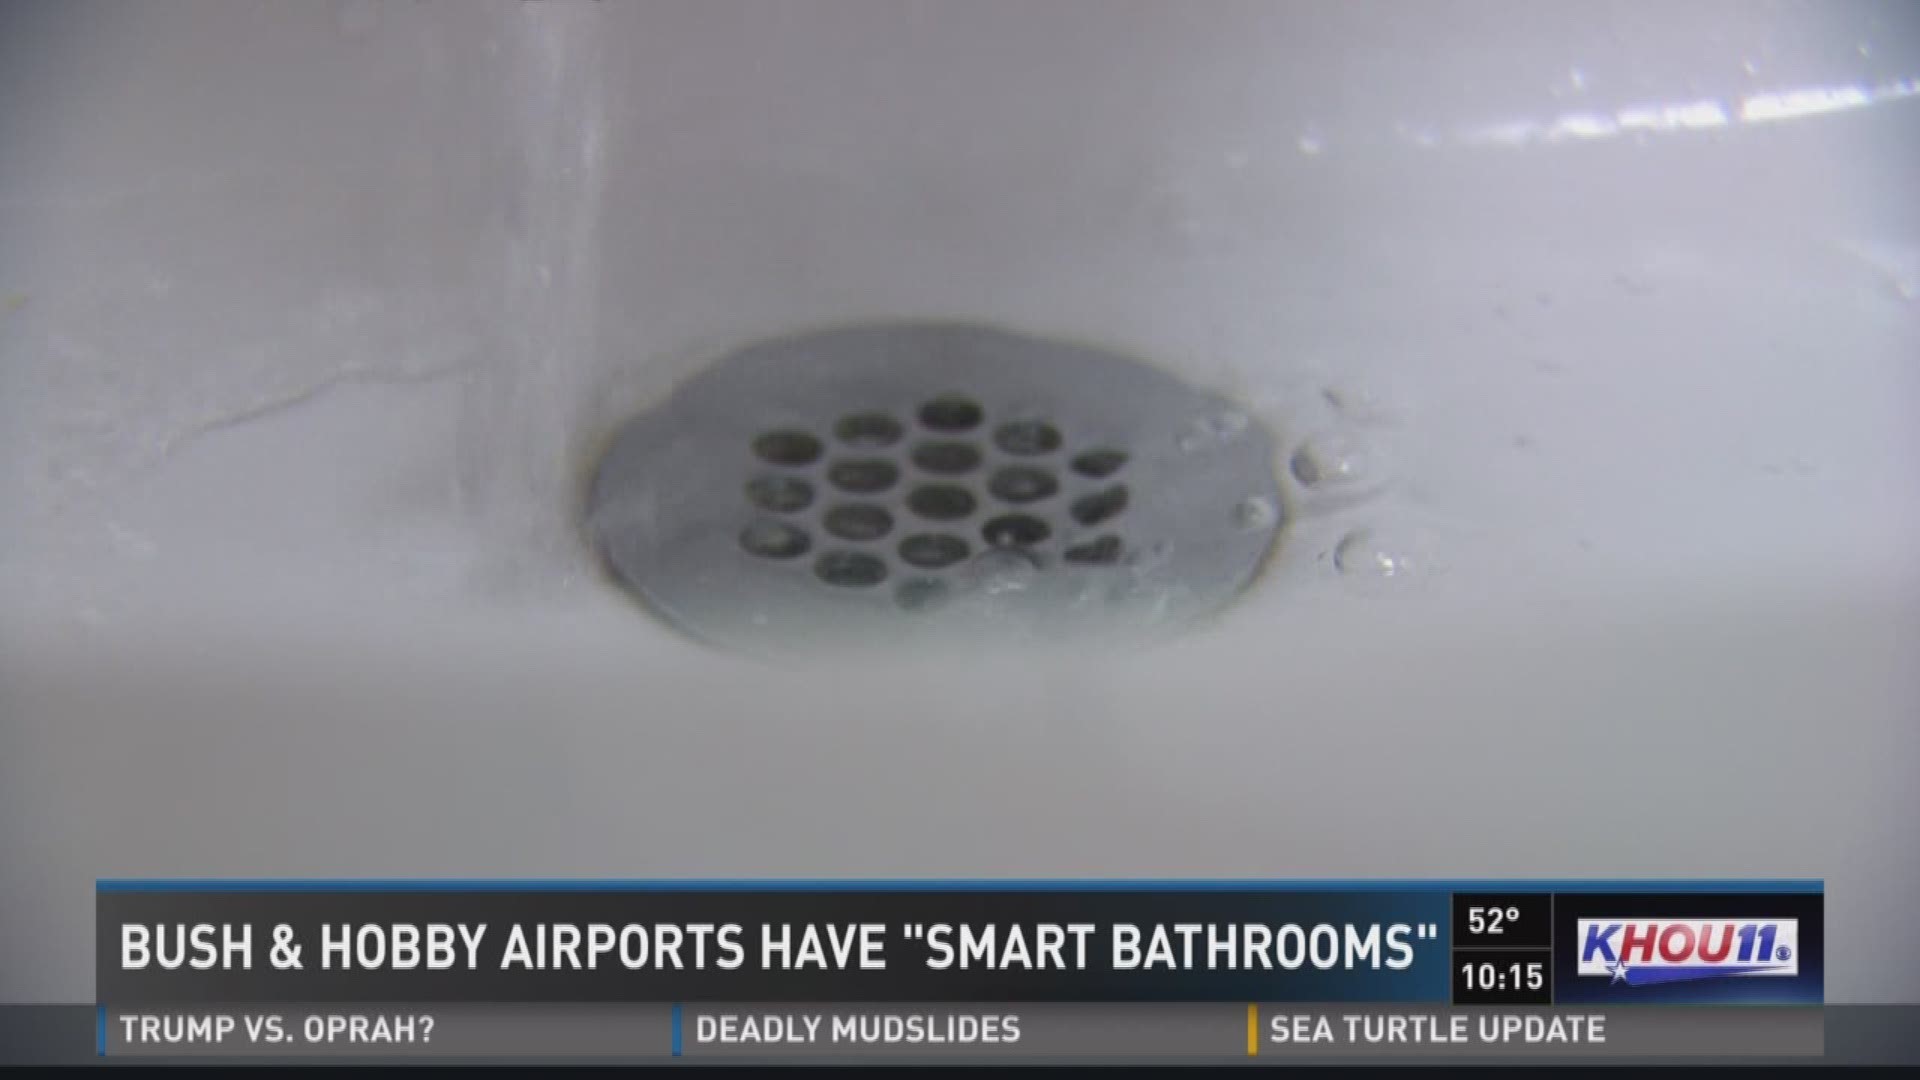 Hobby and Bush Intercontinental Airport management believes their new ?Smart Restrooms? are cleaner, smell better and key to both airports? futures.